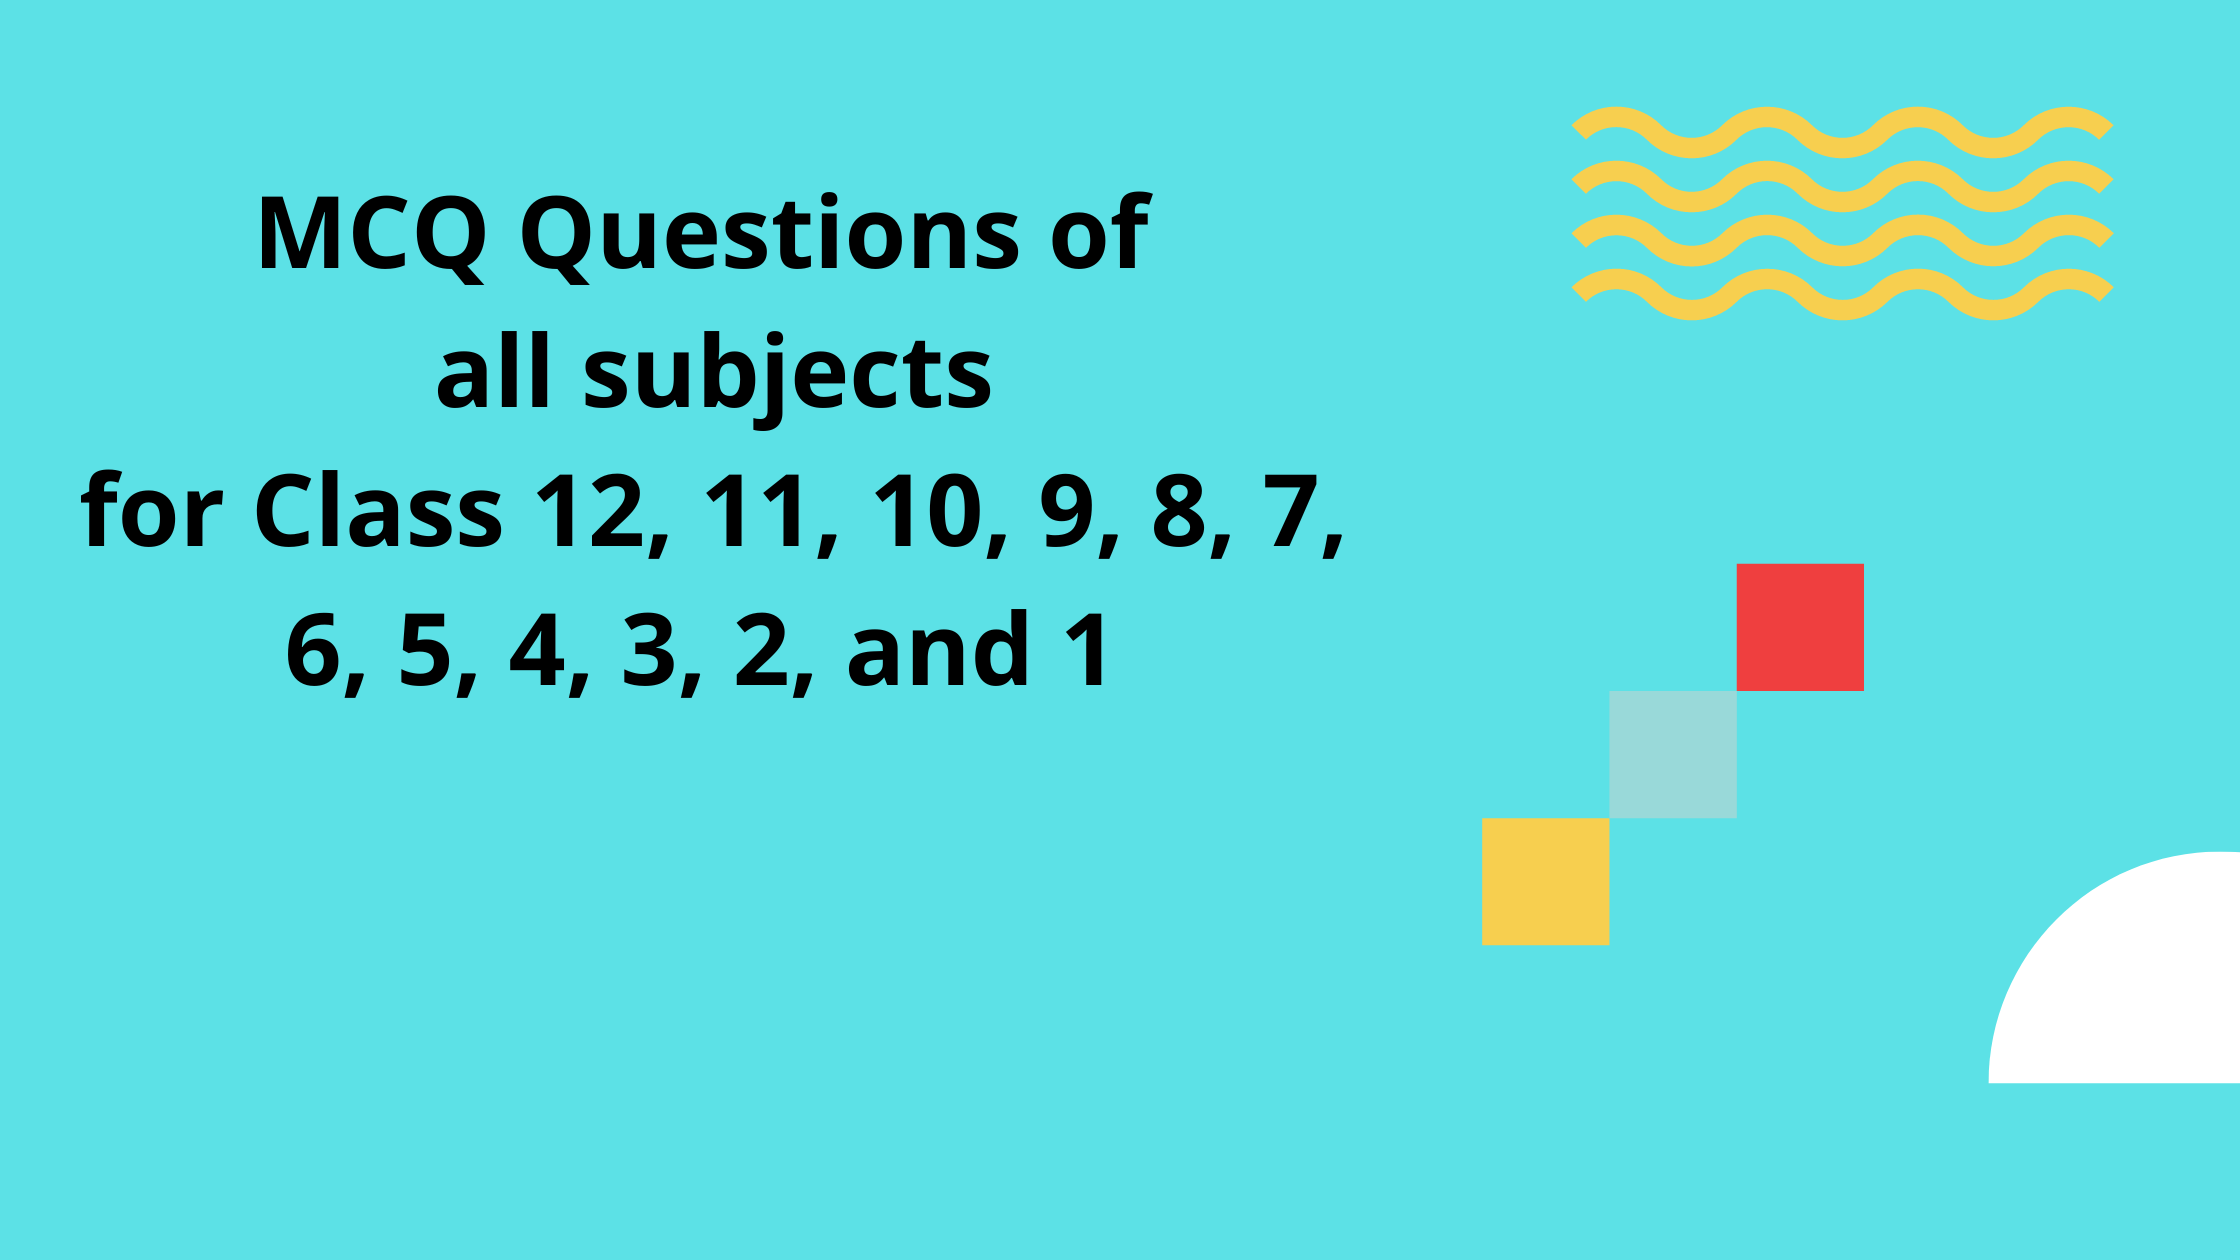 MCQ Questions of all subjects for Class 12